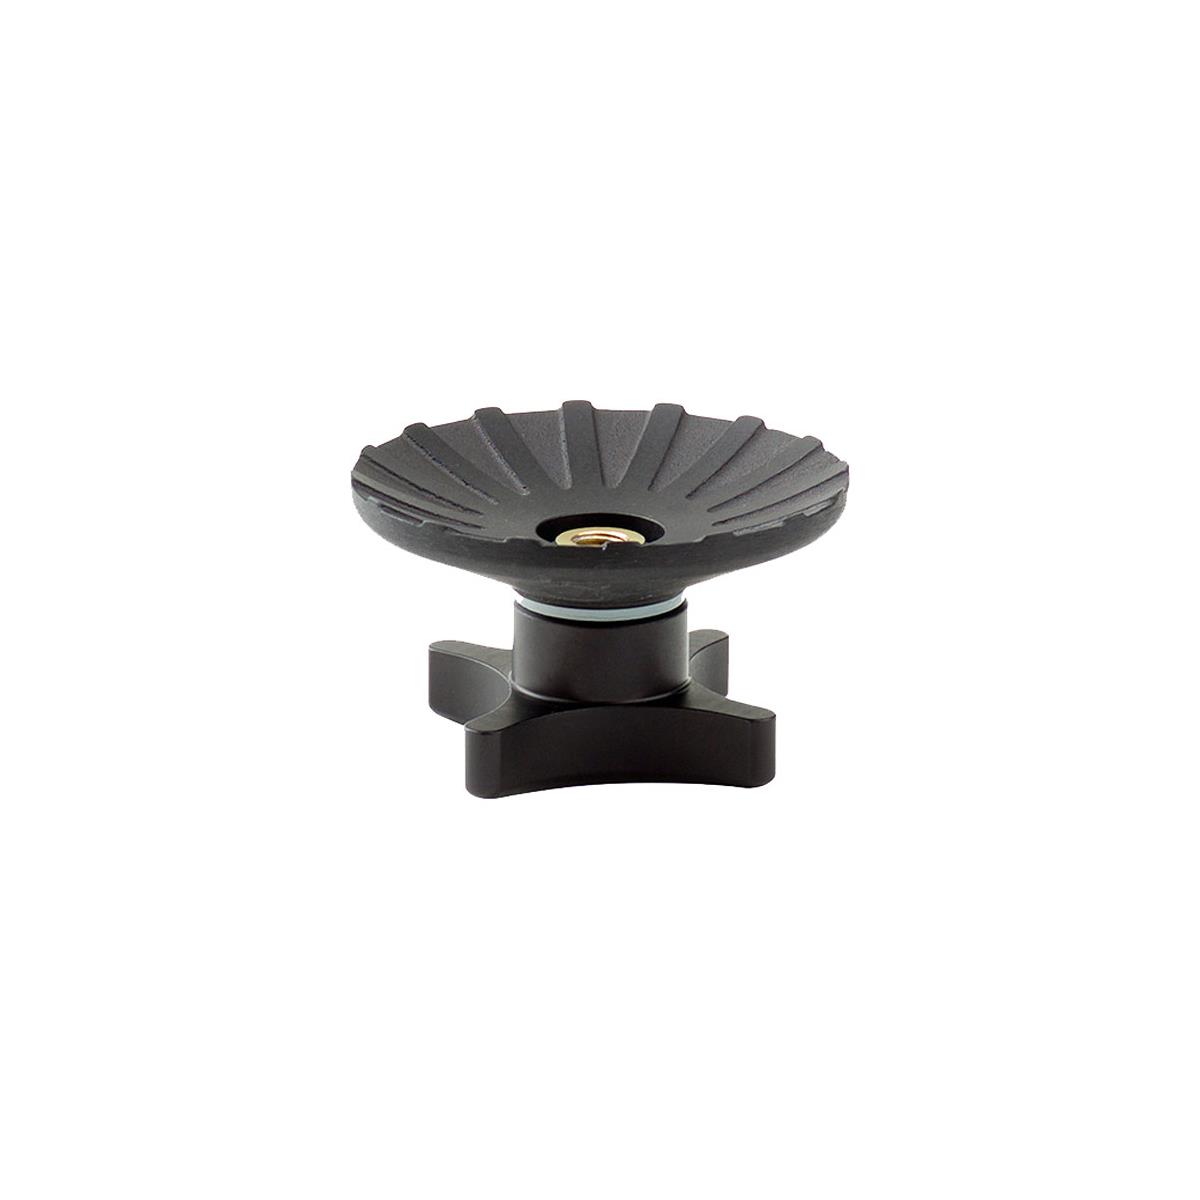 Image of OConnor 150mm Ball Tie-Down for 08414 Base